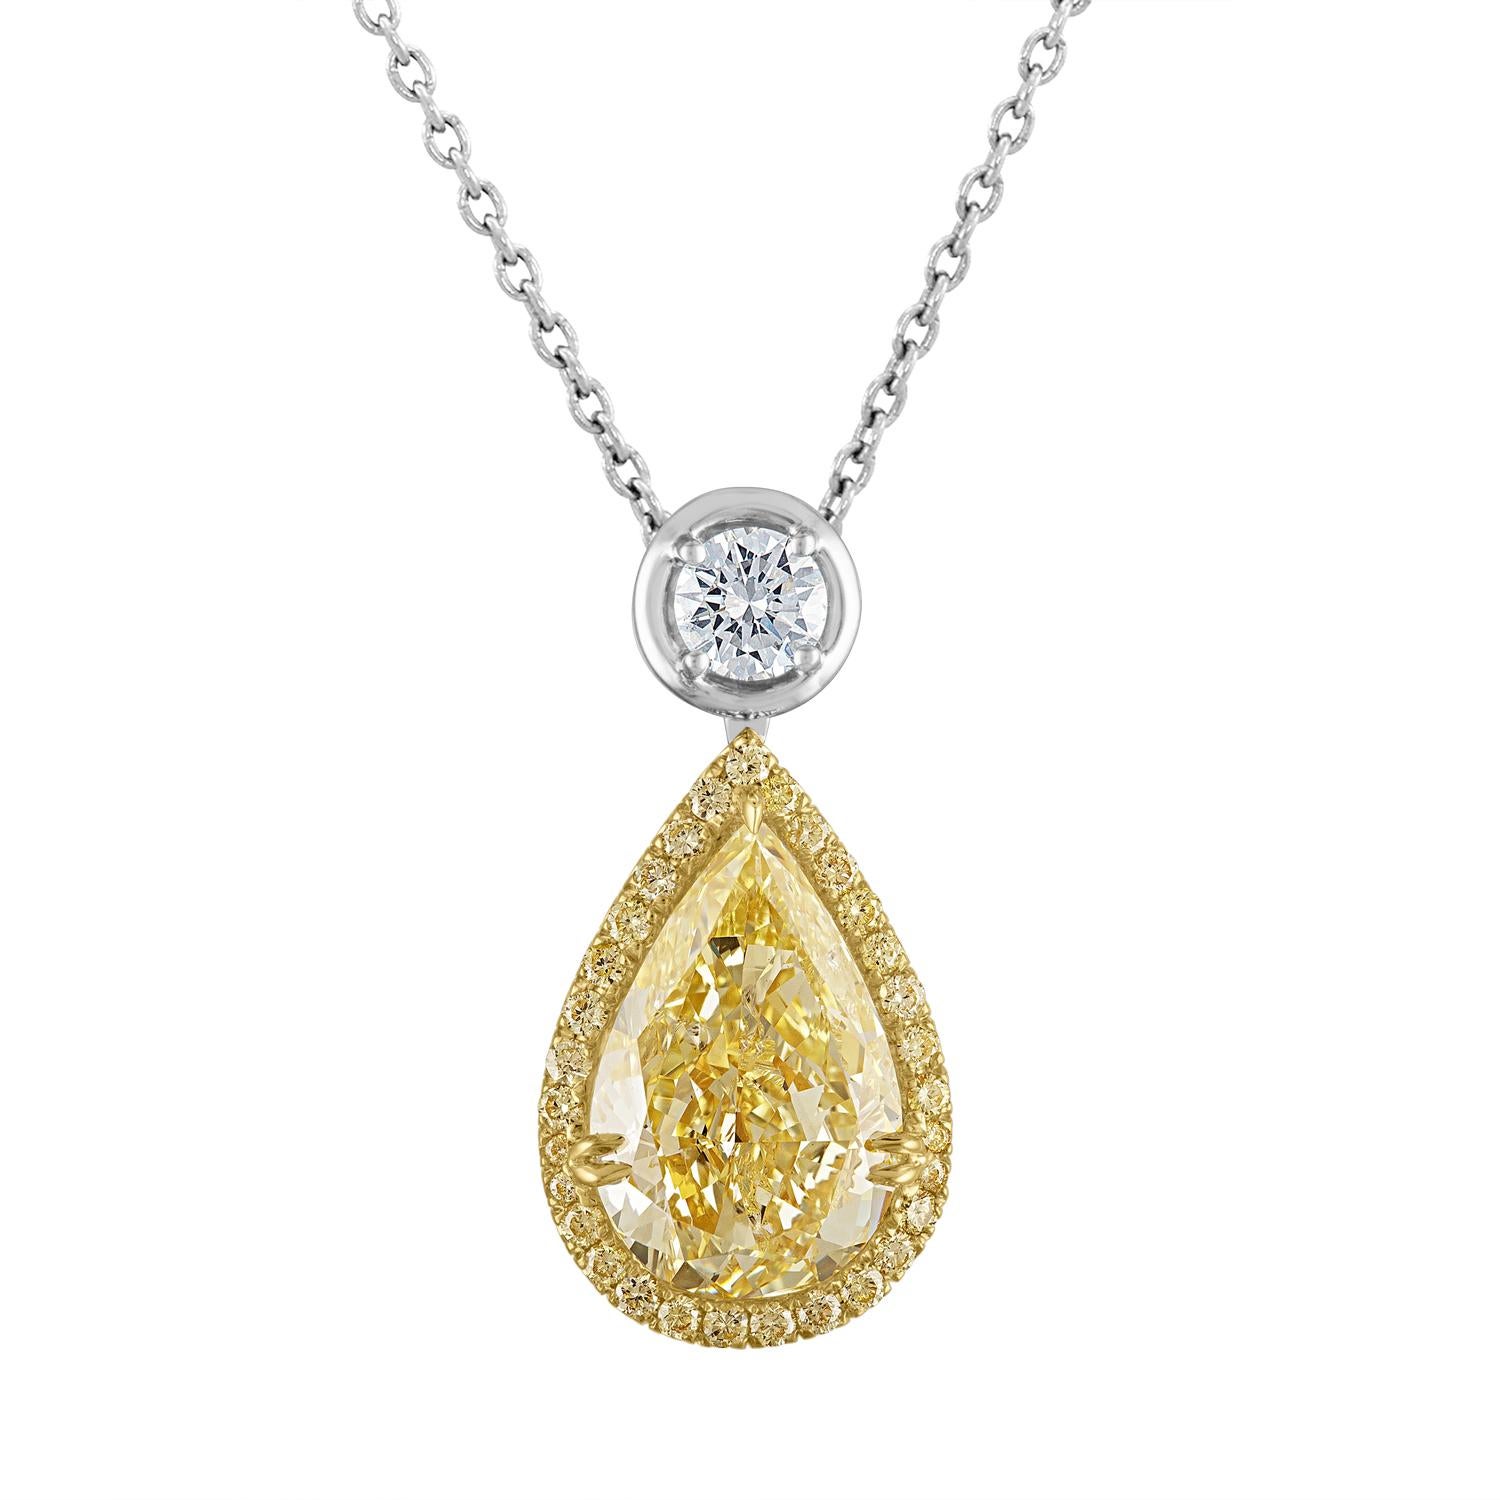 Brilliant Pear Shape, GIA Certified as Fancy Light Yellow in Color and SI2 in Clarity is set in Two Tone Mounting, 18K Yellow Gold and Platinum.
The 8.19 Carat Pear Shape is set in 18K Yellow Gold Box Surrounded by Yellow Diamonds, 31 Round